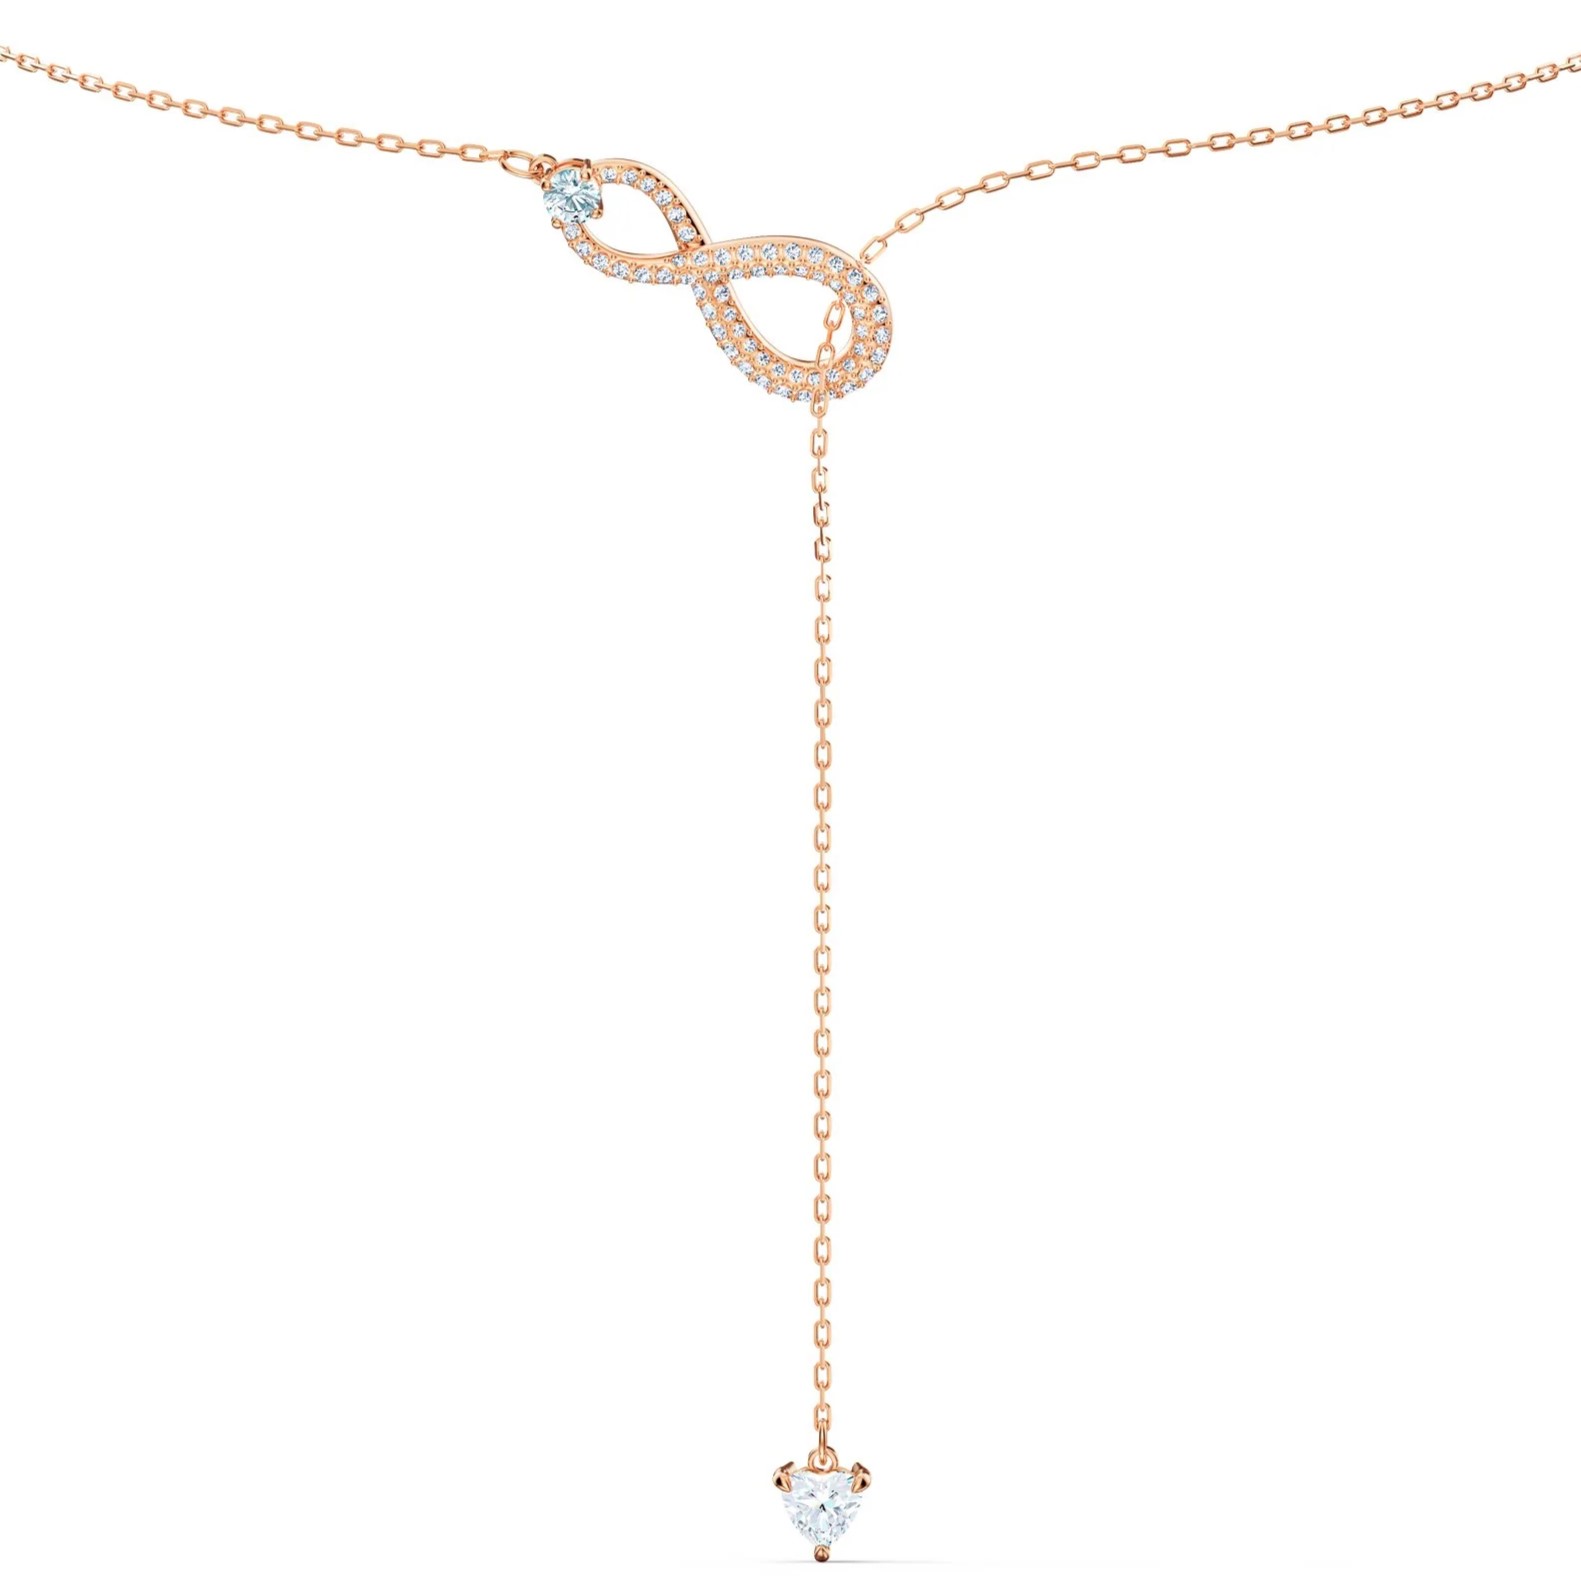 DÂY CHUYỀN THỜI TRANG NỮ SWAROVSKI INFINITY Y NECKLACE WHITE ROSE GOLD-TONE PLATED 5521346 5